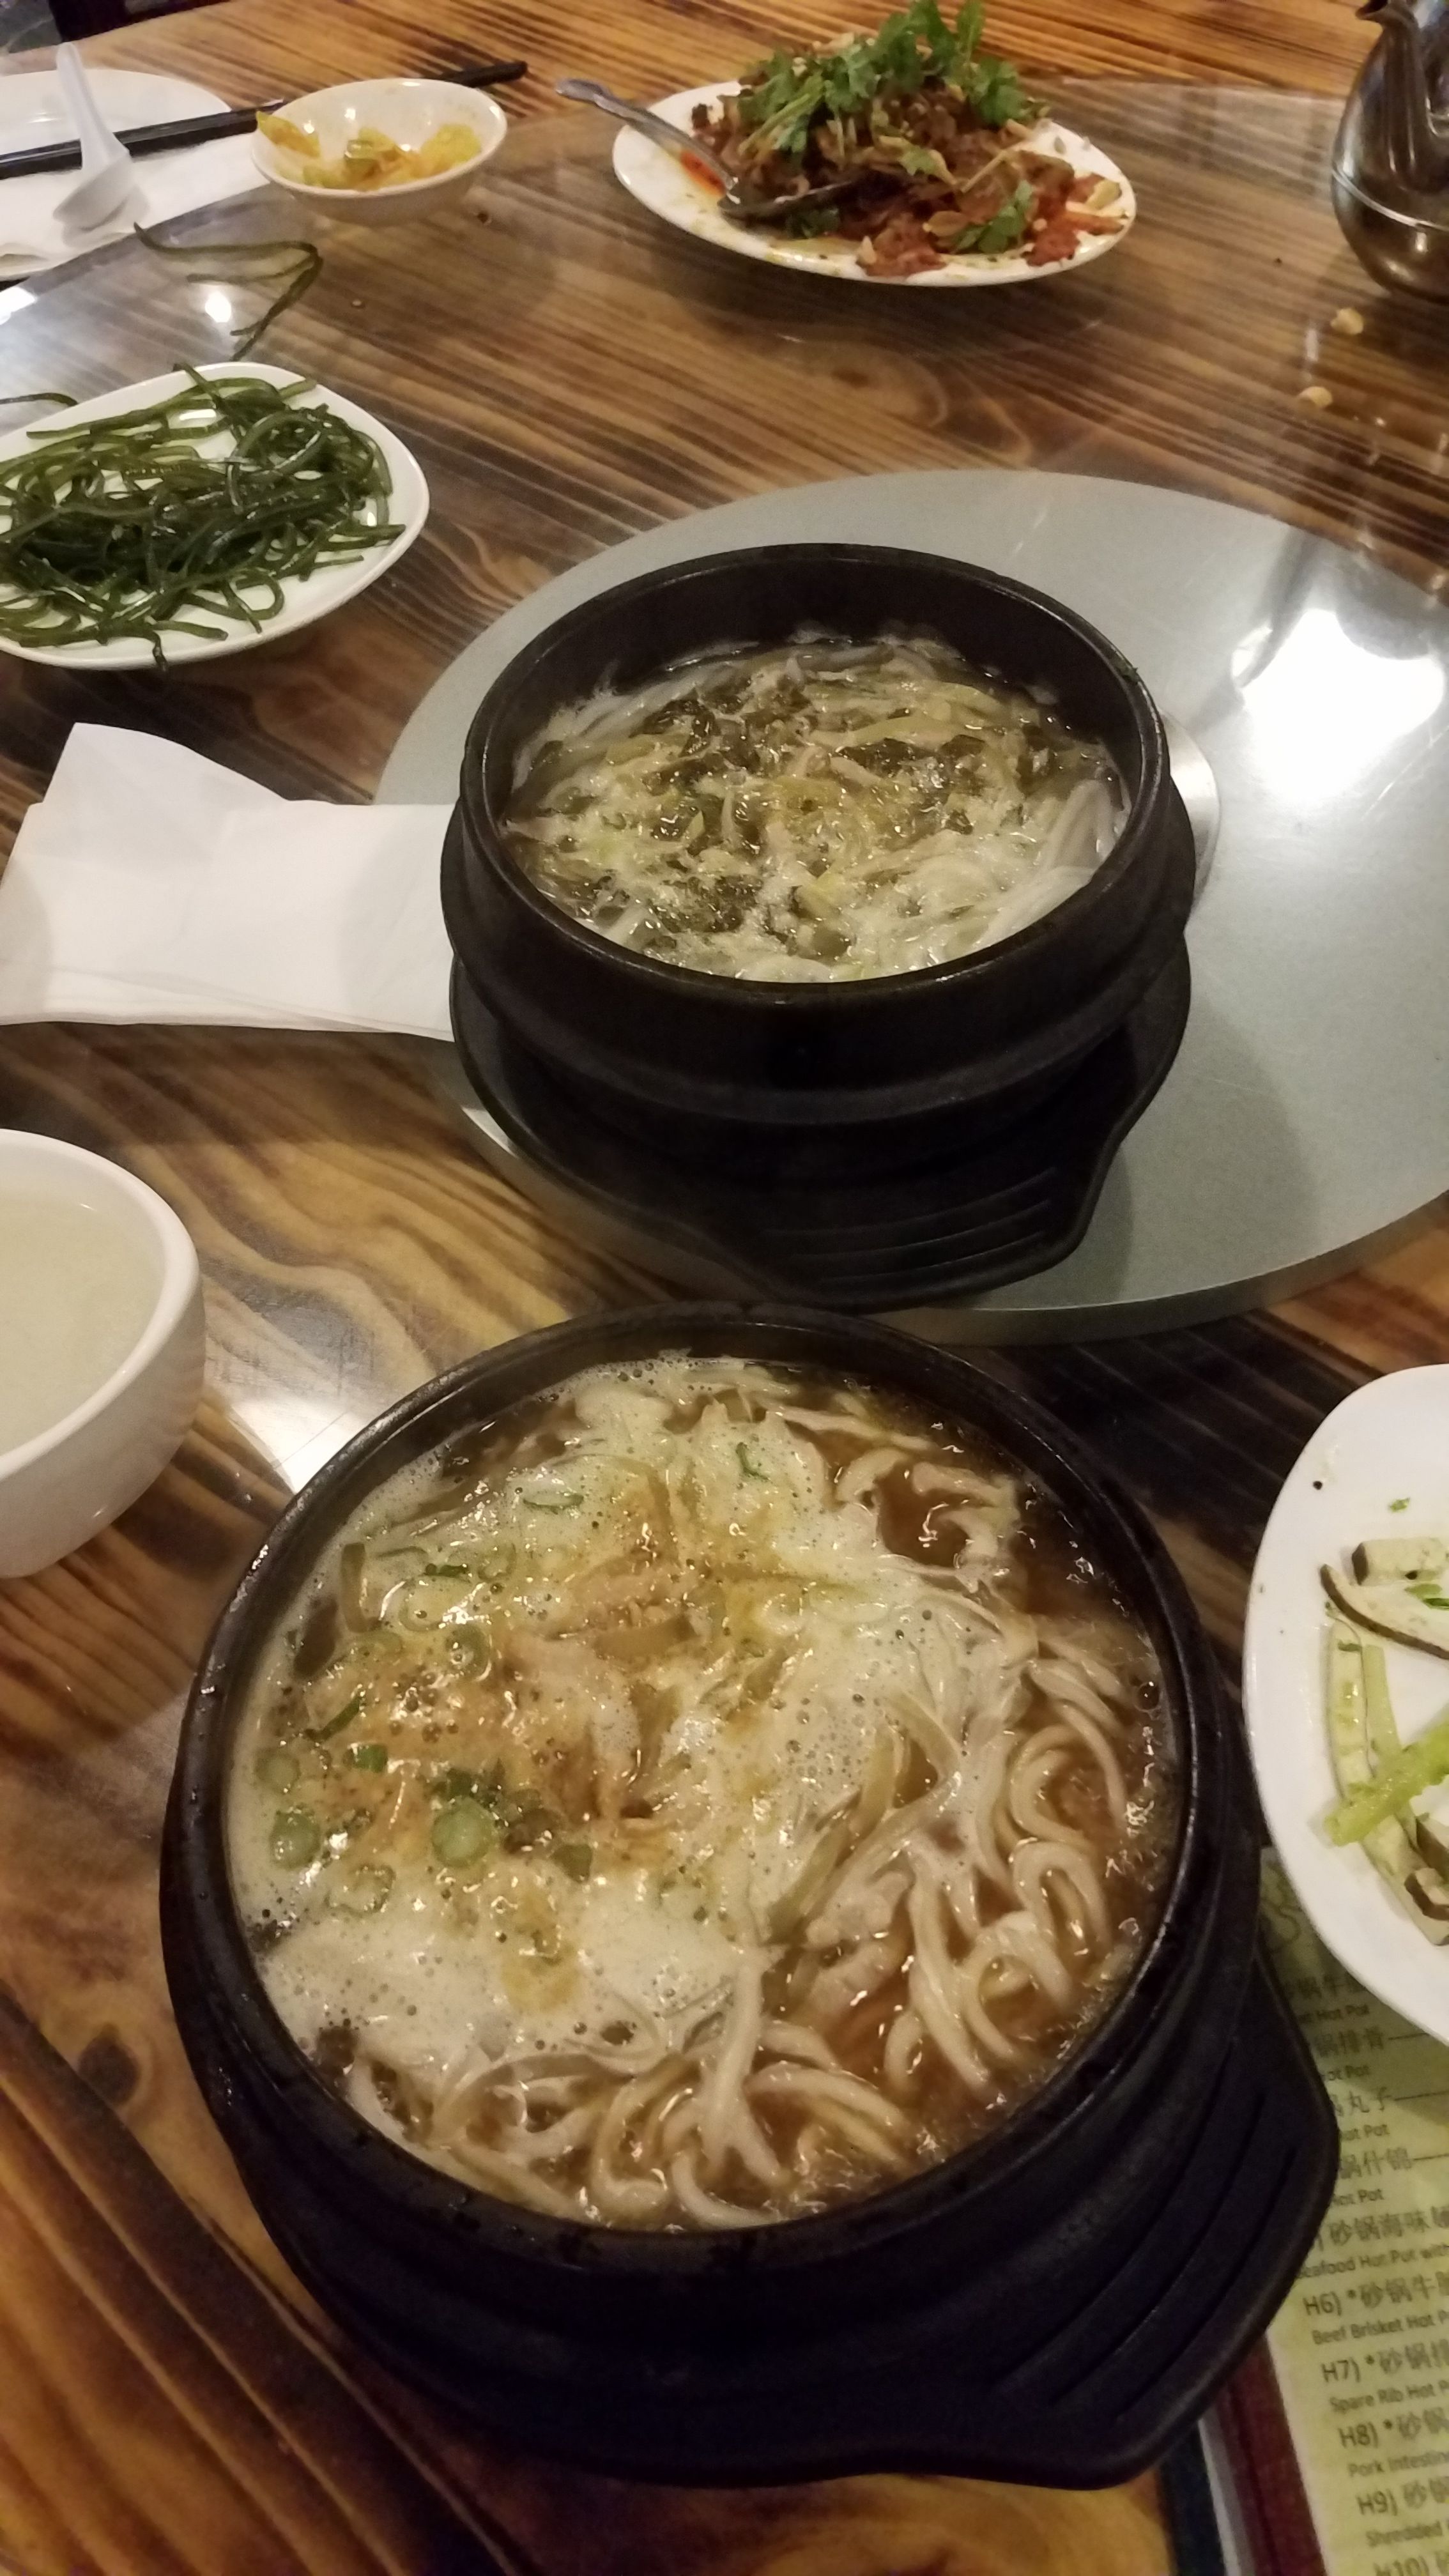 Clay pot dish with noodles